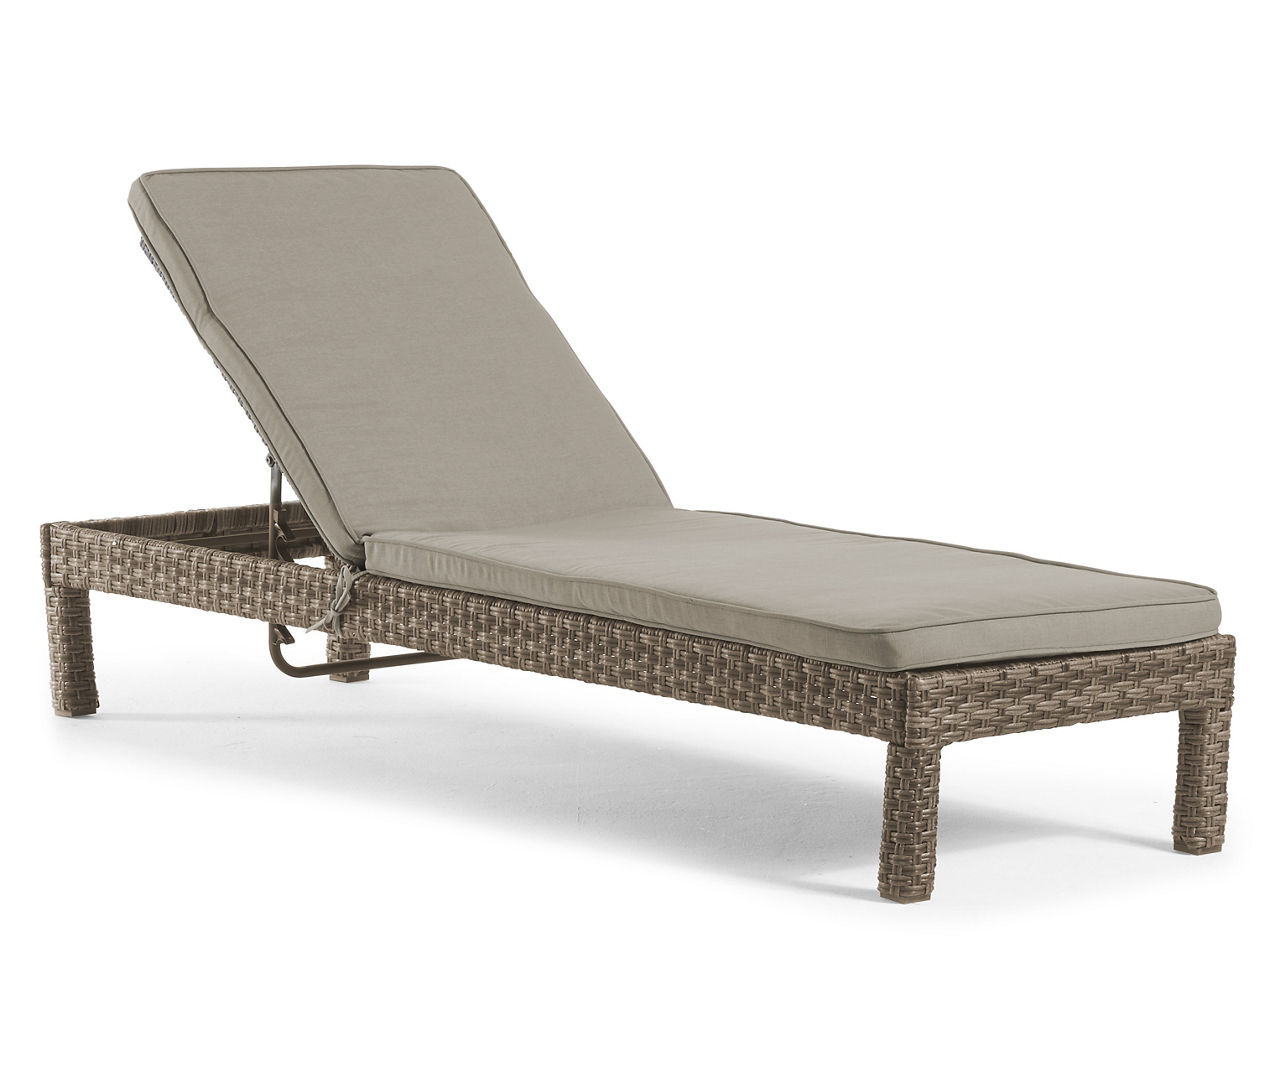 Eagle Brooke Tan Wicker Cushioned Chaise Lounger